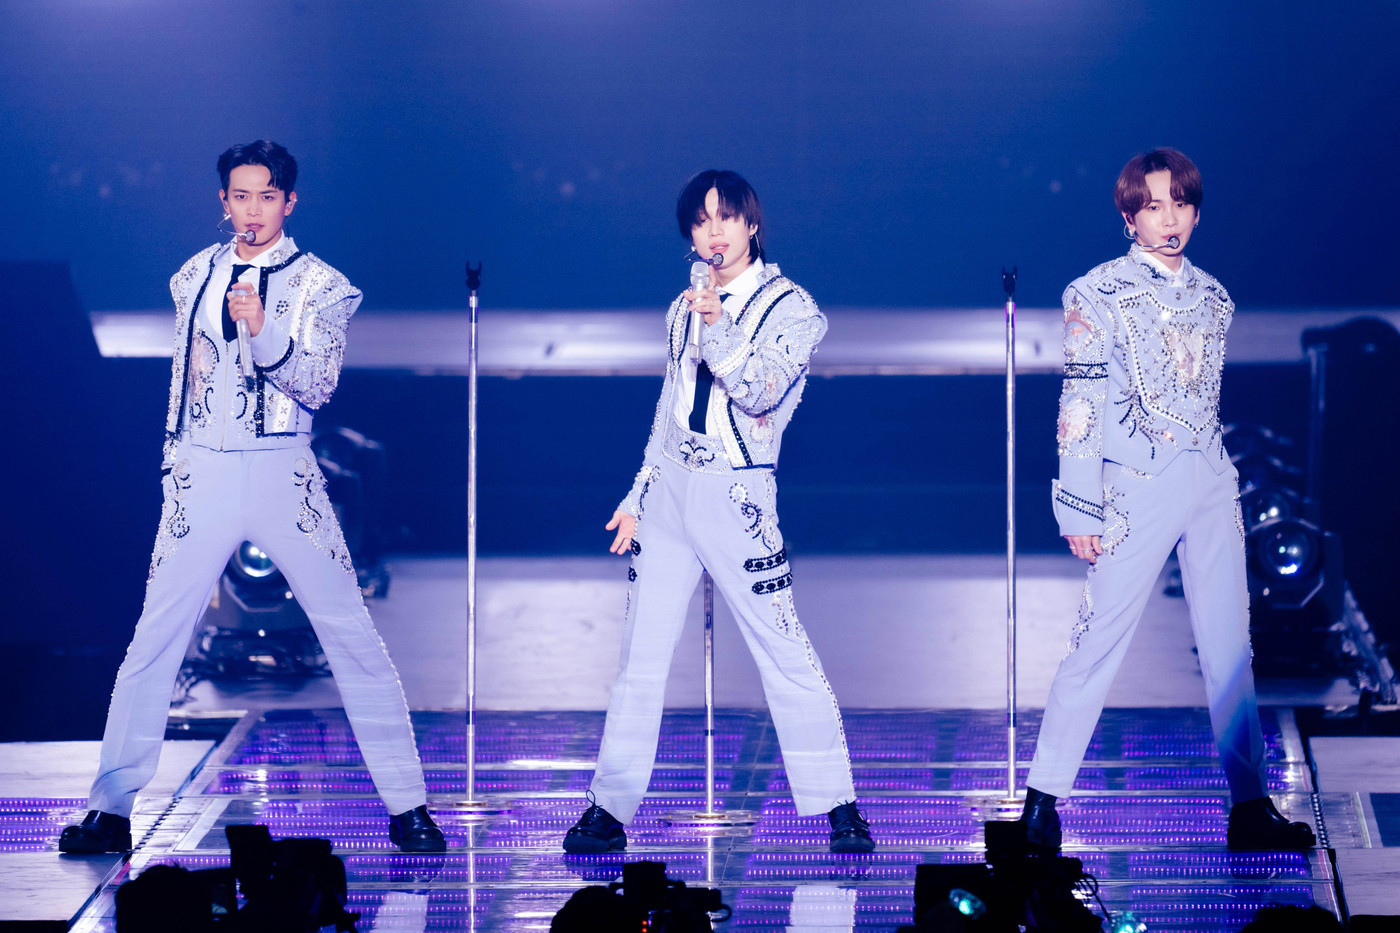 WOWOW「SHINee’s Back to TOKYO DOME!!」4月＆5月の番組放送日が確定！最新東京ドーム公演のリピート放送・配信も決定 - 画像一覧（2/4）